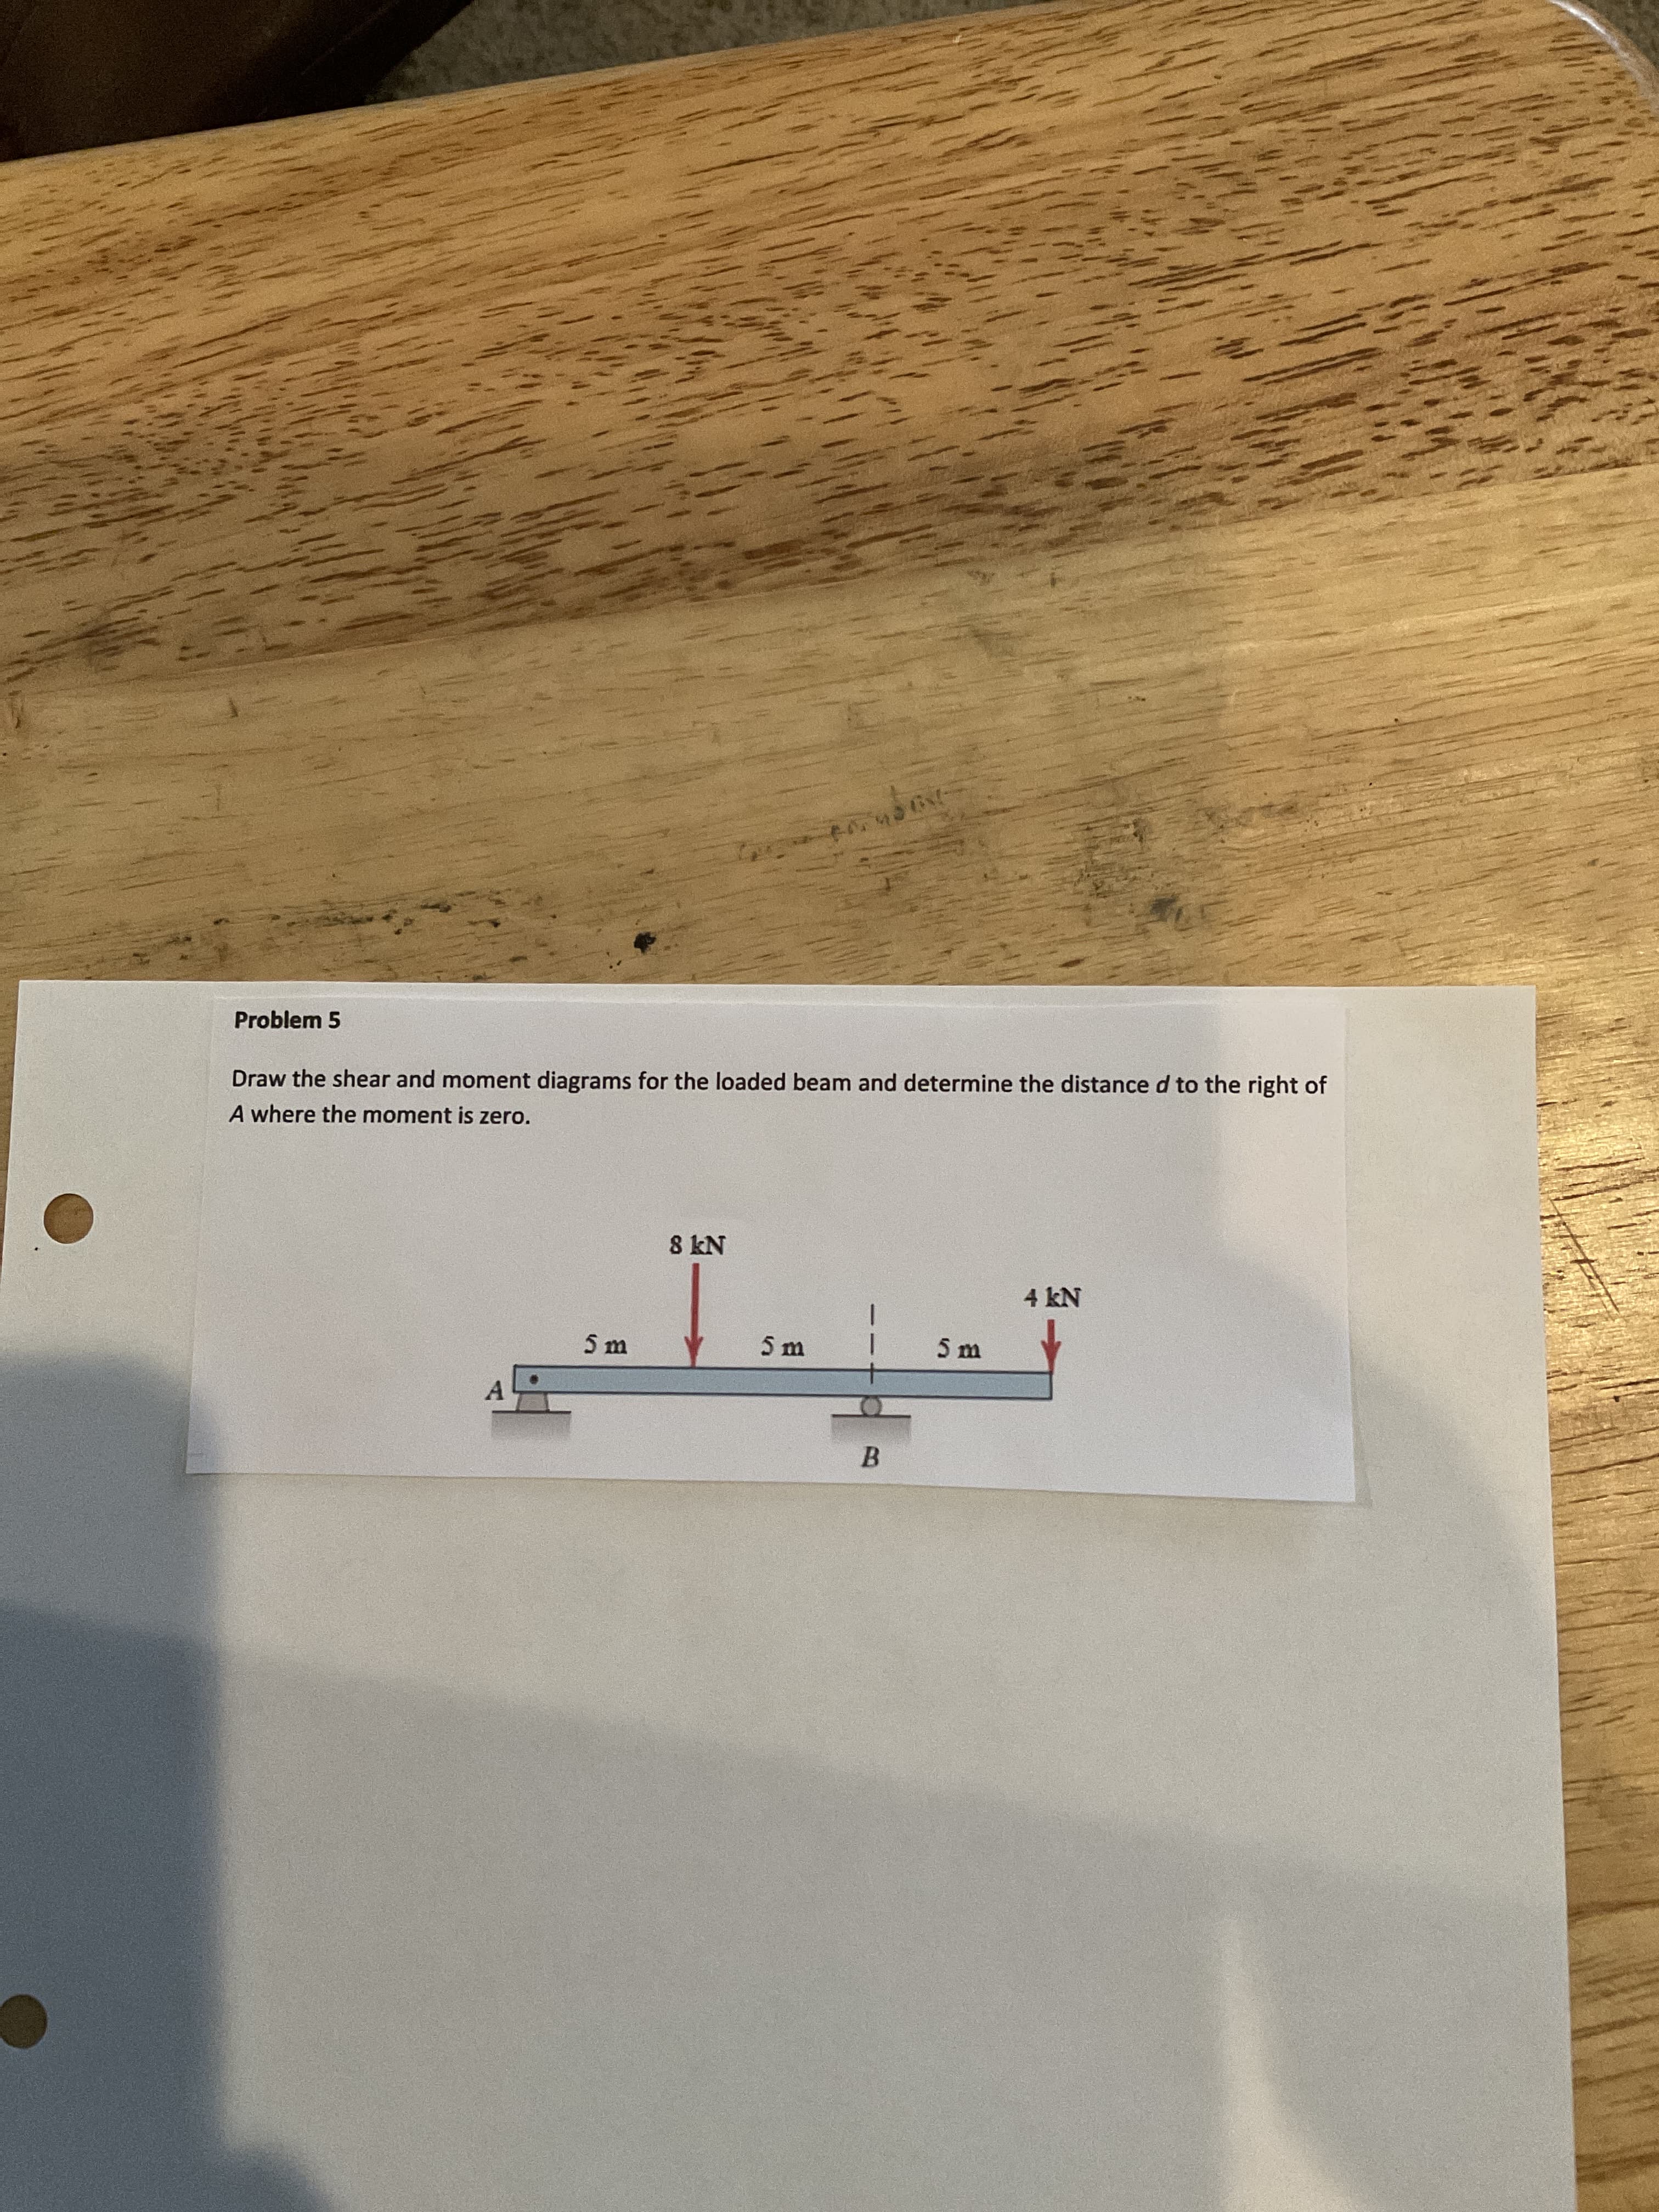 Problem 5
Draw the shear and moment diagrams for the loaded beam and determine the distance d to the right of
A where the moment is zero.
5 m
5 m
5 m
B.
